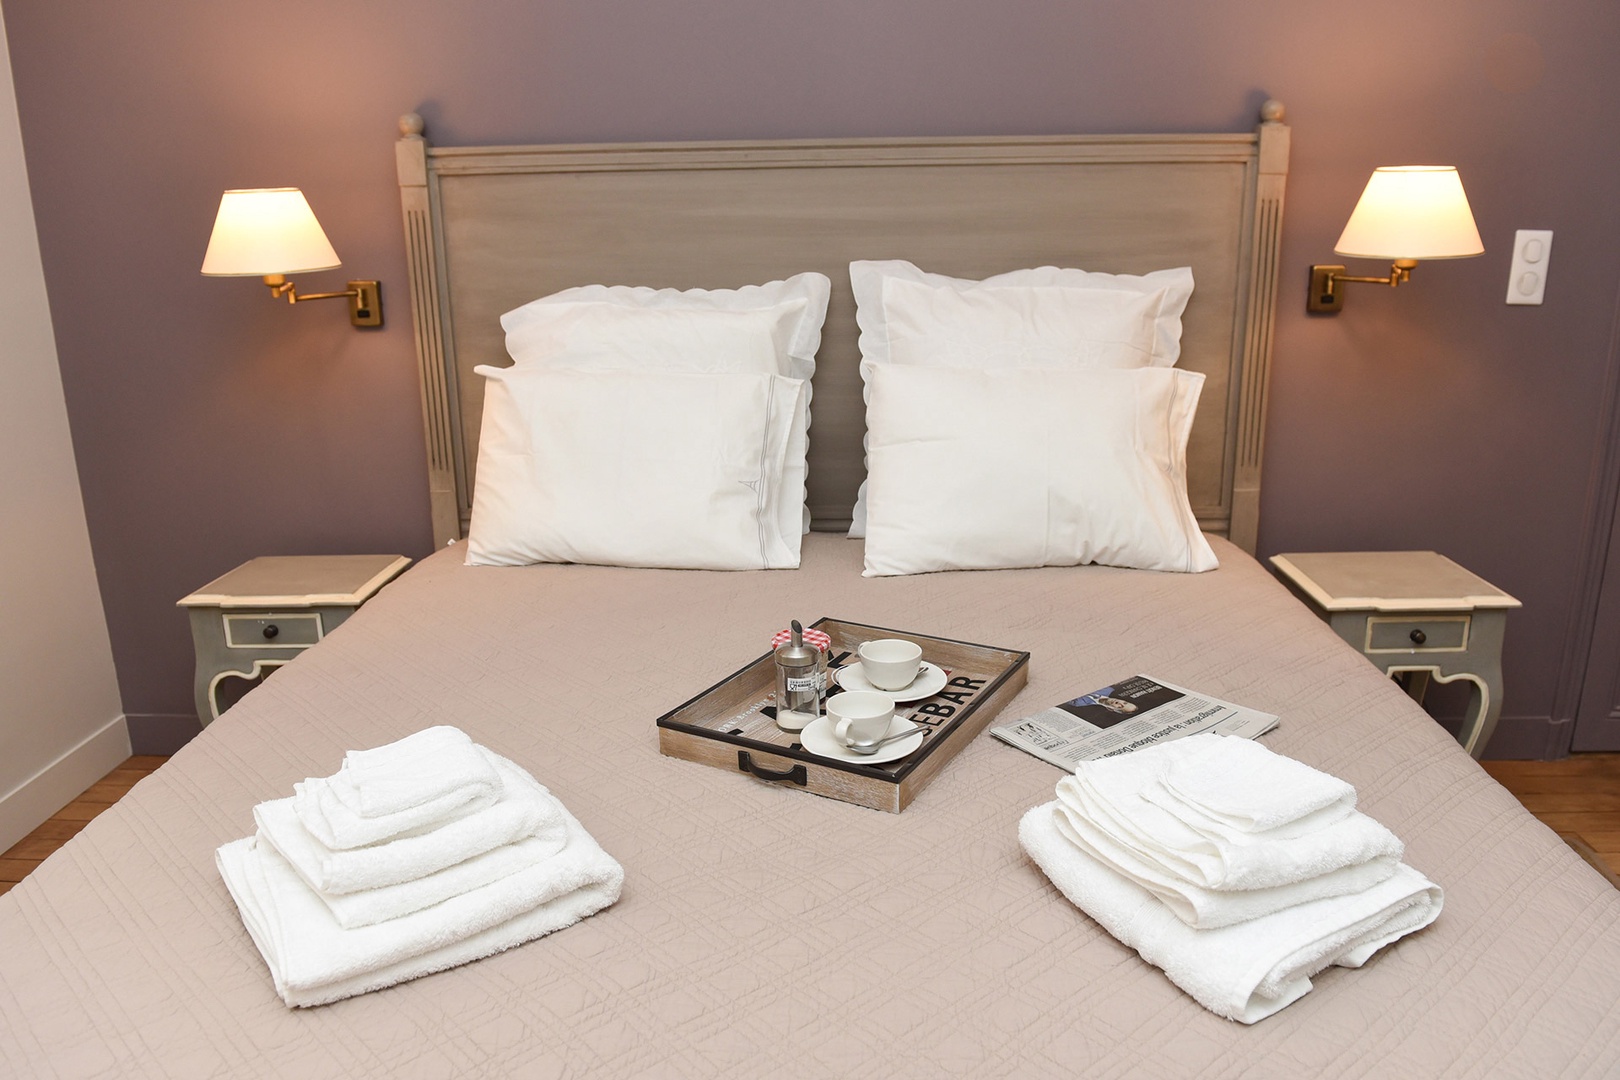 Relax in the comfortable bed after a fun day of sightseeing in Paris.